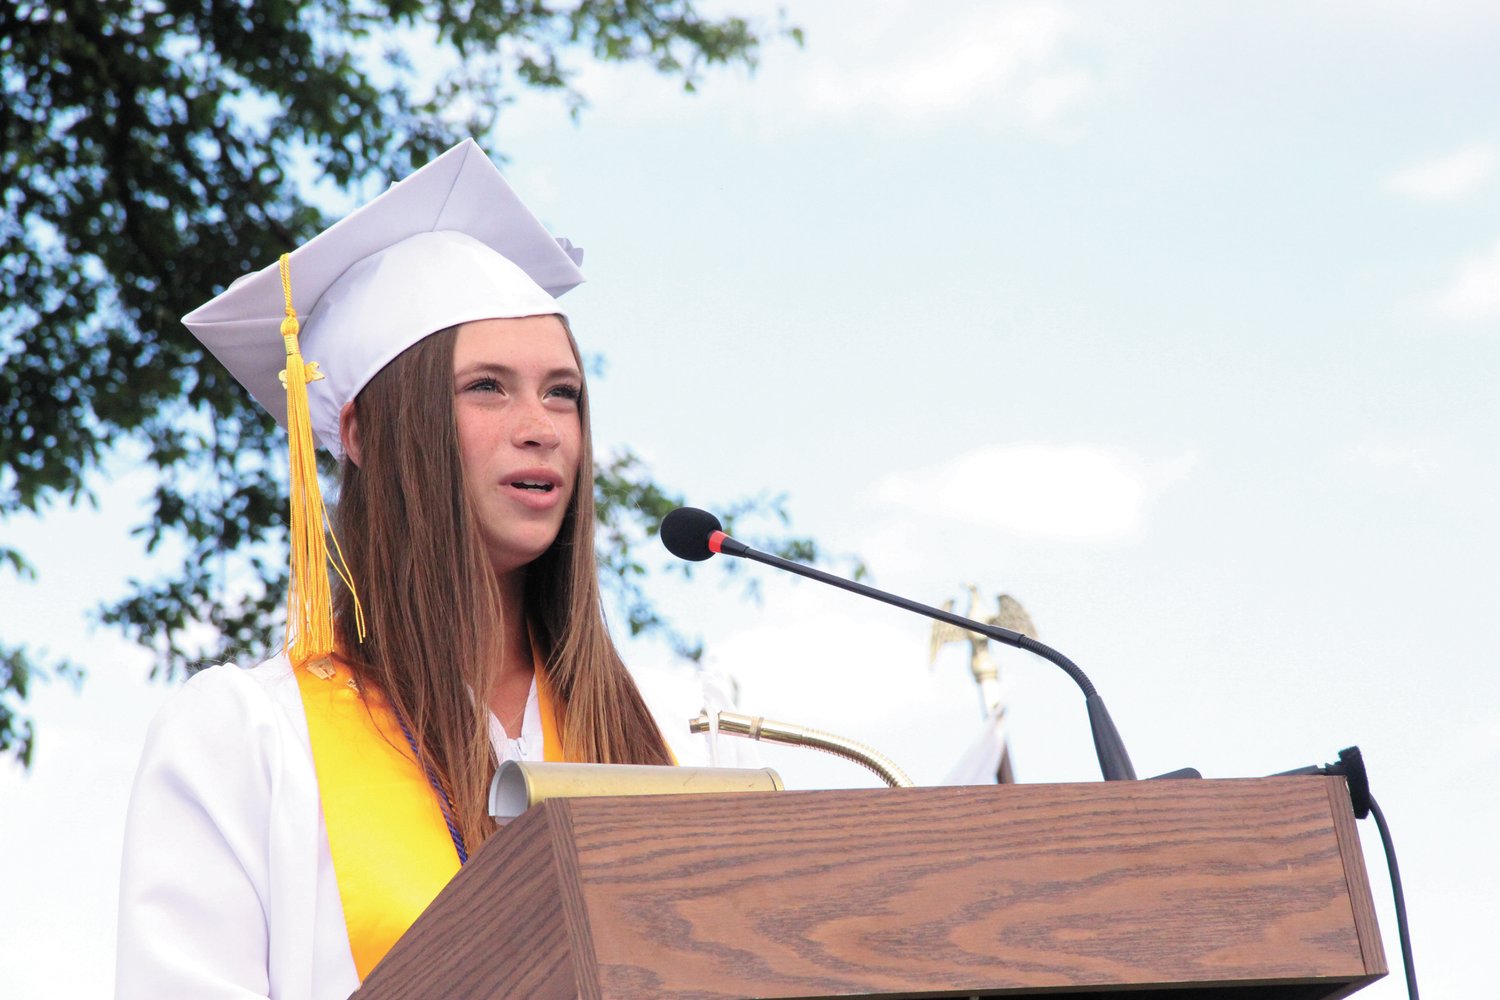 Pilgrim Class of 2022 Salutatorian Sophia Schobel spoke to her class and those in attendance during graduation on Tuesday Afternoon at the Aldrich Mansion.